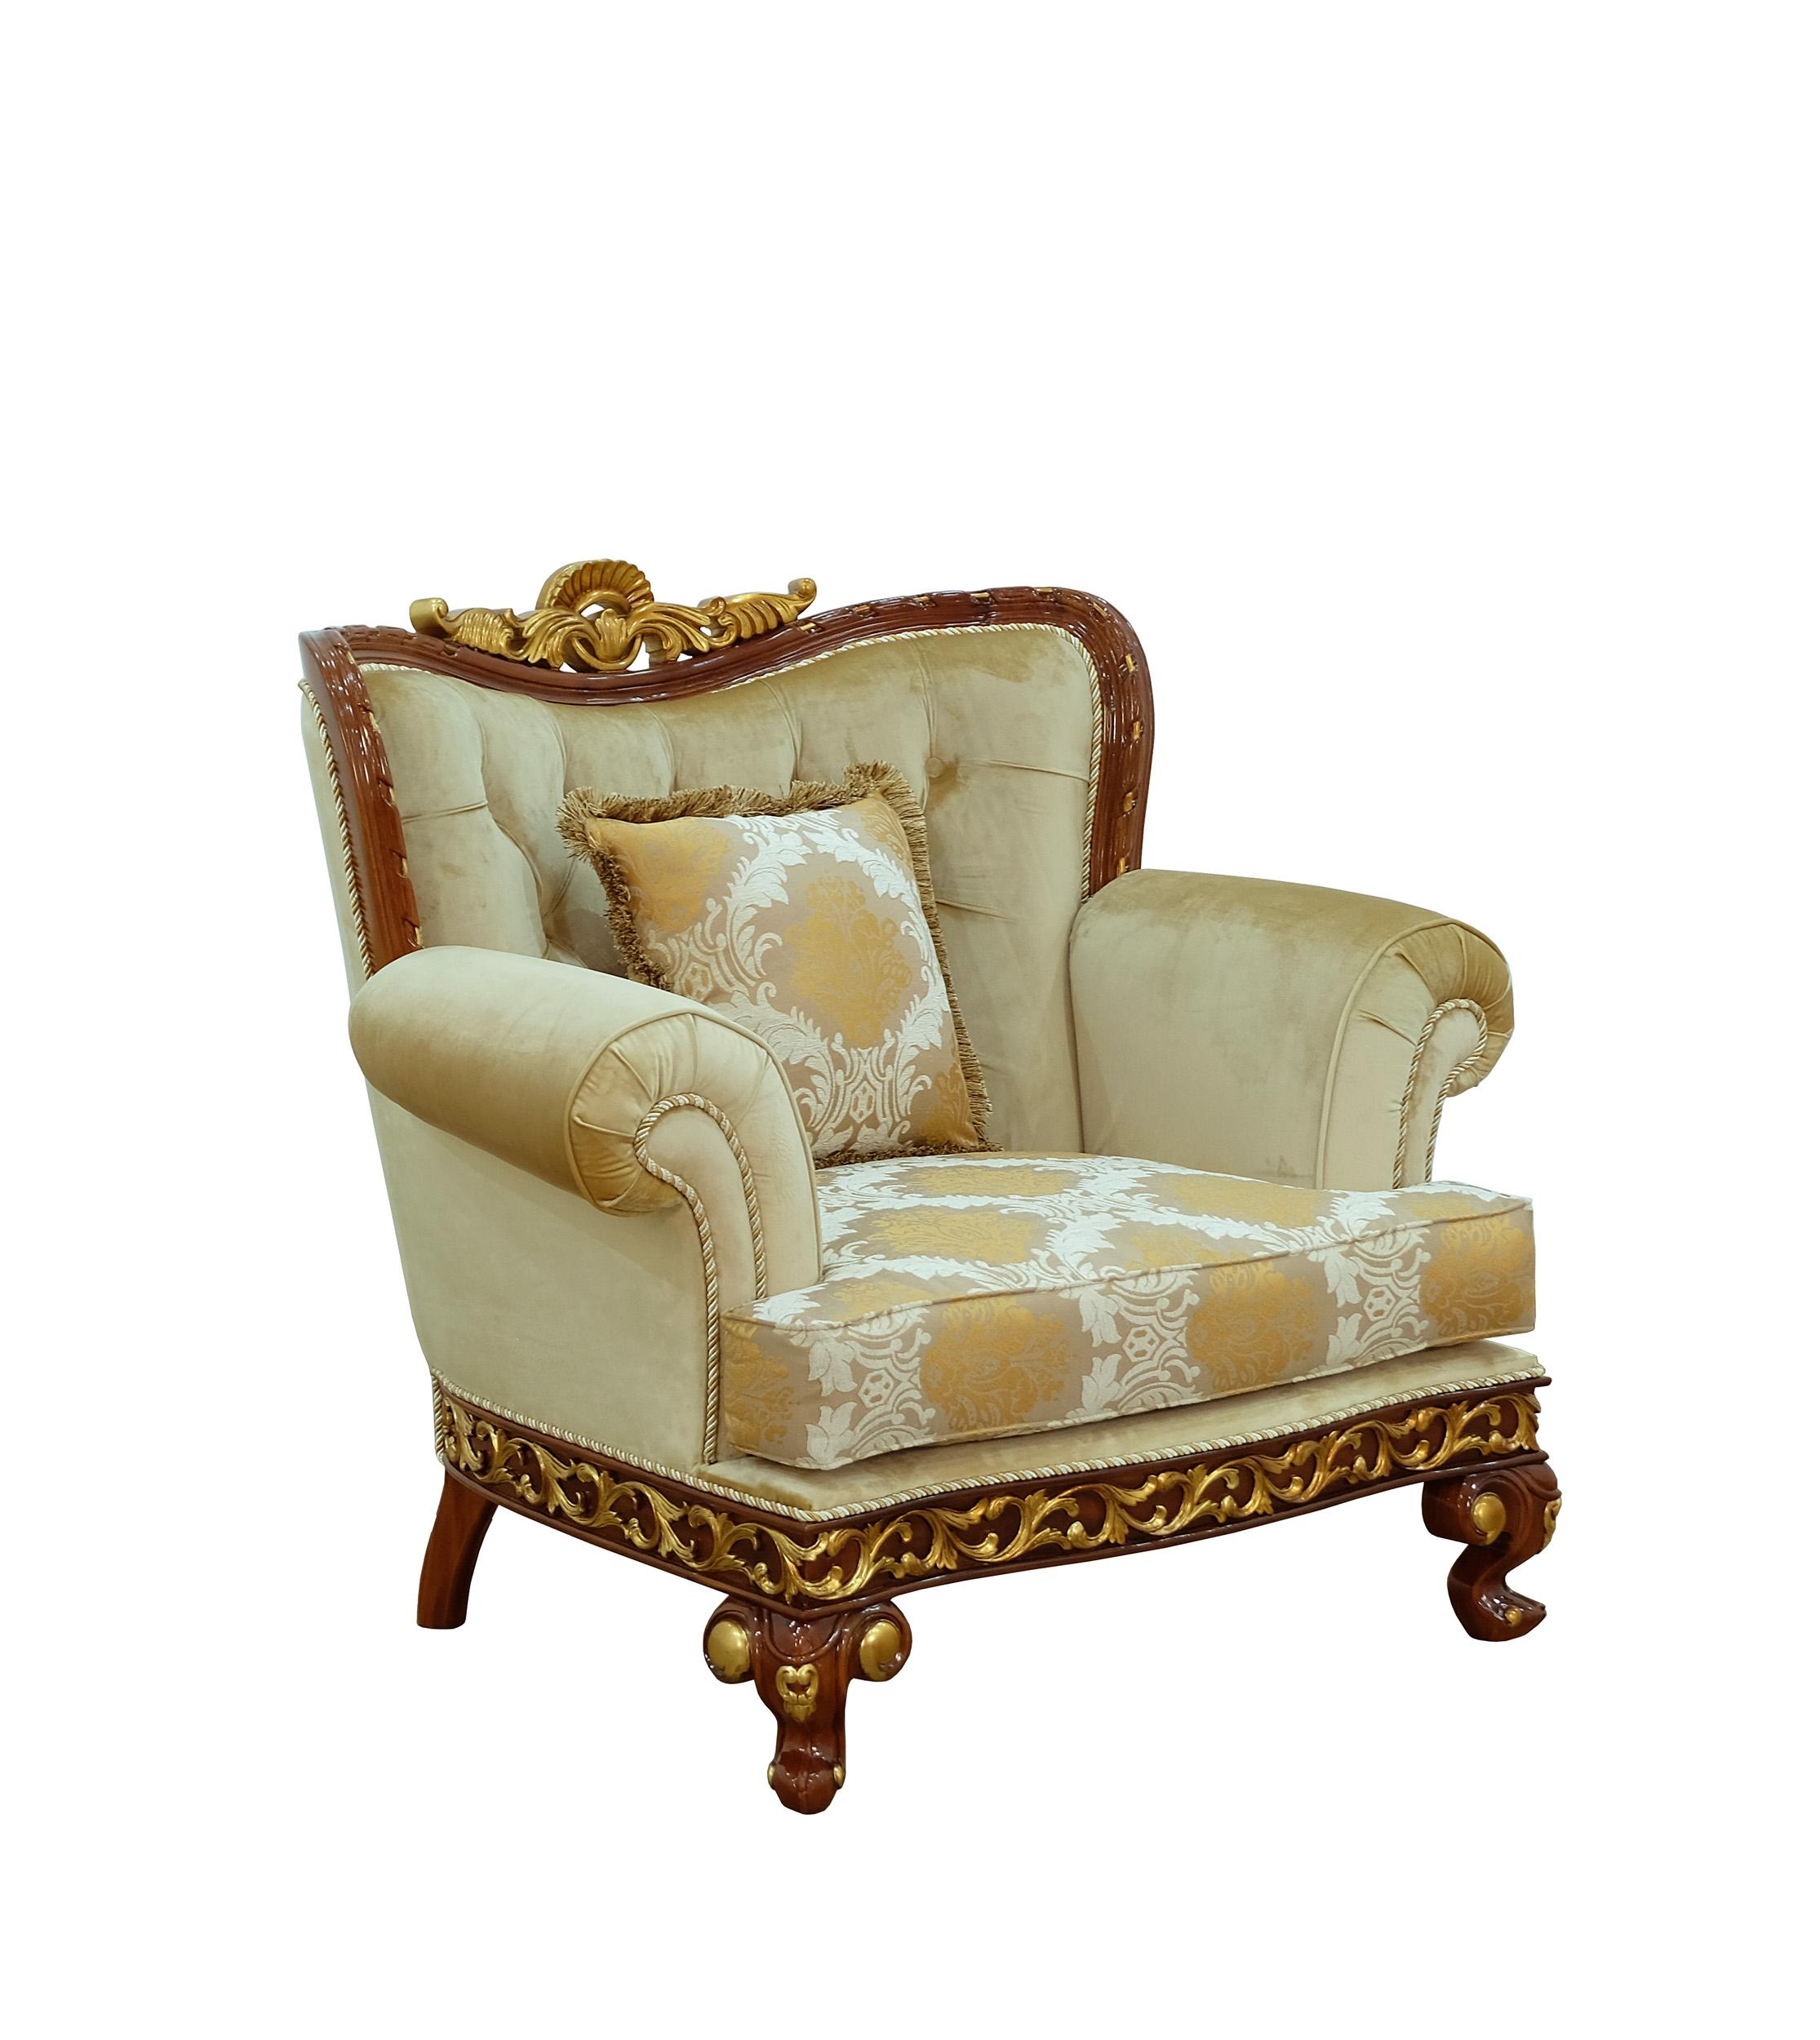 Classic, Traditional Arm Chair FANTASIA 40019-C in Sand, Walnut, Gold Fabric